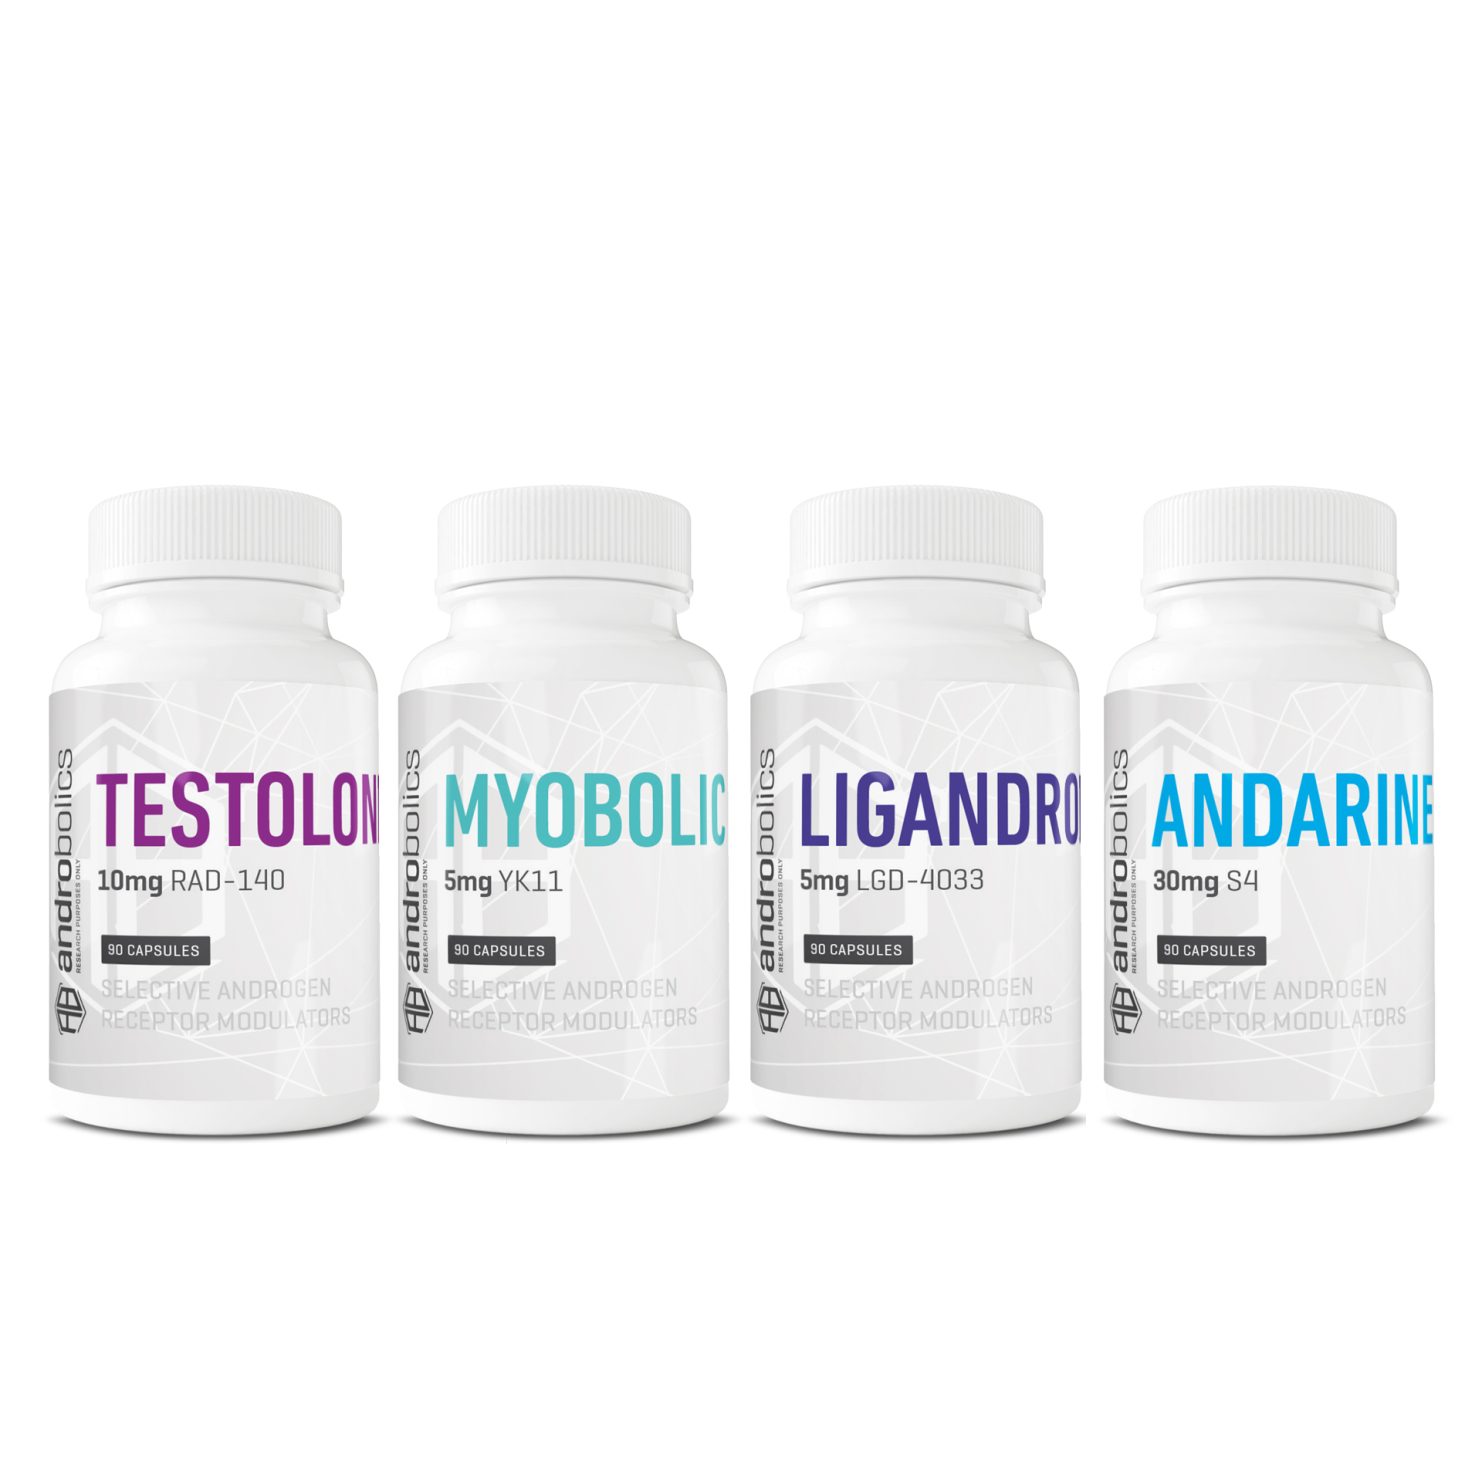 Strength-Boosting SARMs Stack with Ligandrol, Andarine, Myobolic, and Testolone bottles from Androbolics.